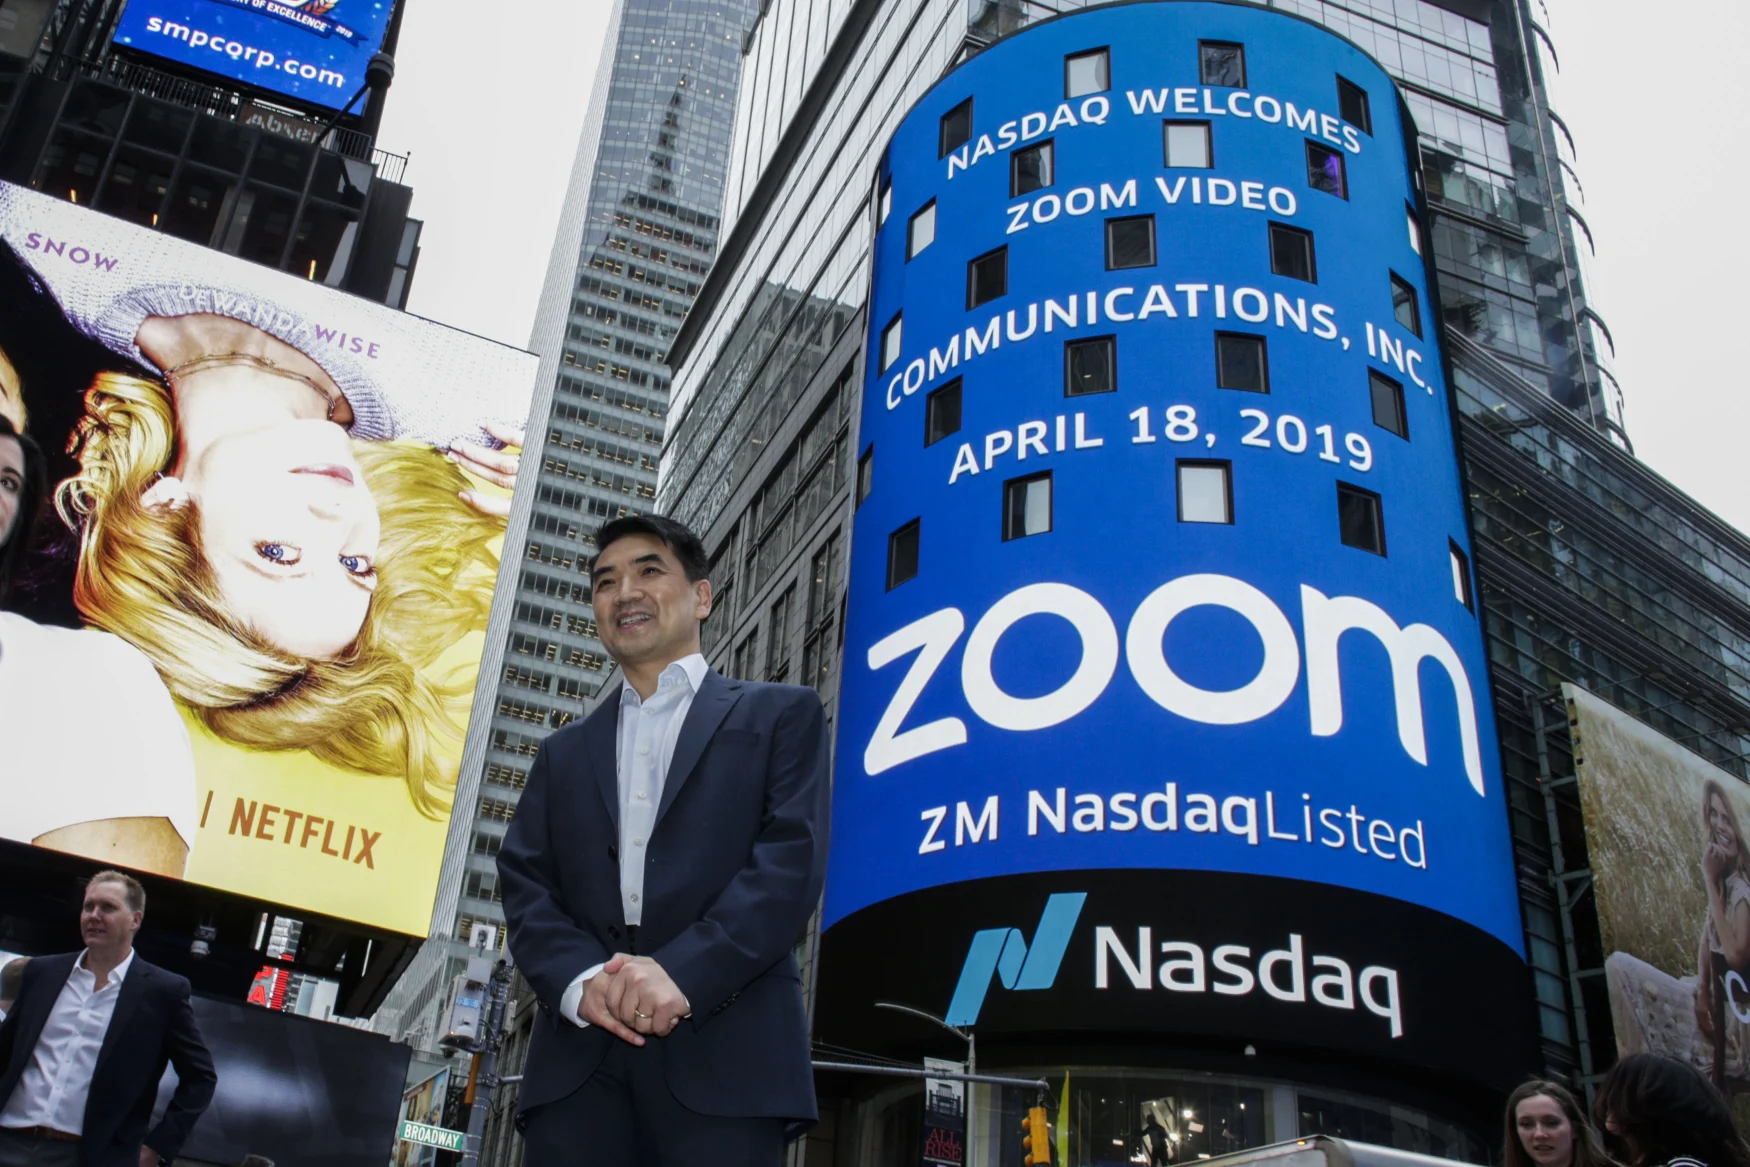 NEW YORK, NY - APRIL 18: Zoom founder Eric Yuan poses in front of the Nasdaq building as the screen shows the logo of the video-conferencing software company Zoom after the opening bell ceremony on April 18, 2019 in New York City. The video-conferencing software company announced it's IPO priced at $36 per share, at an estimated value of $9.2 billion. (Photo by Kena Betancur/Getty Images)